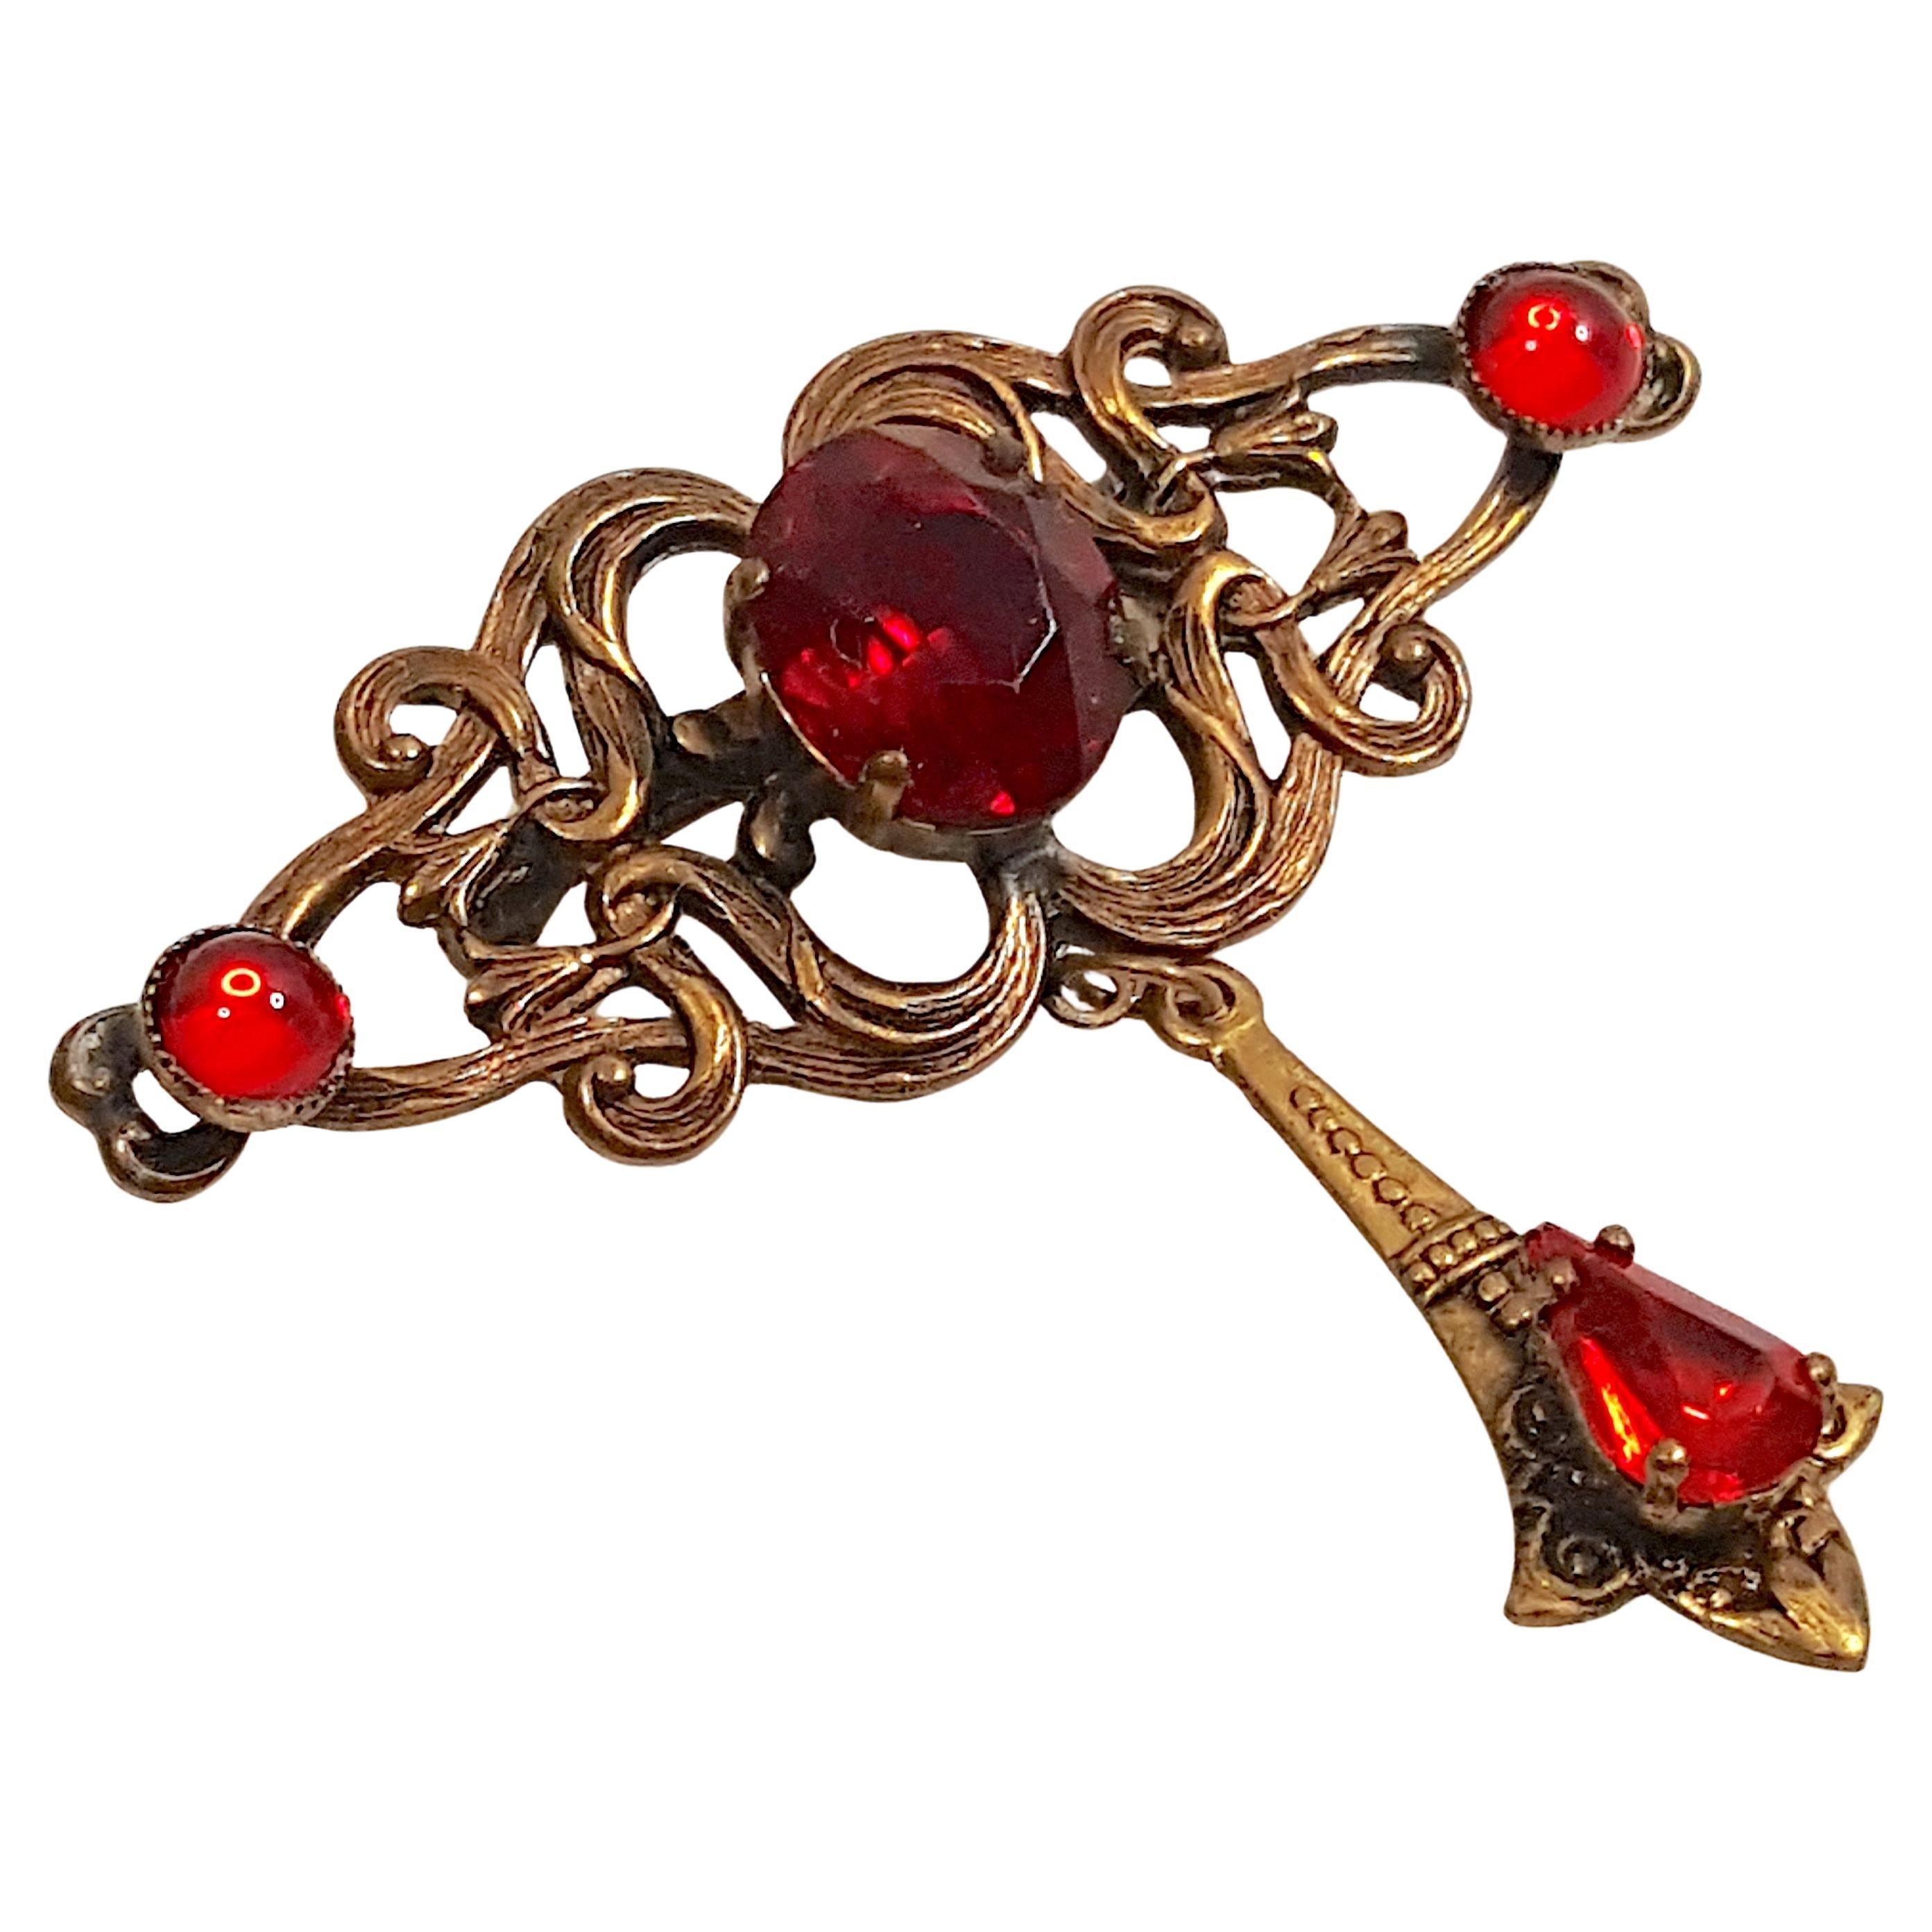 In the 1920s in an Art-Nouveau style, Czech costume-jewelry designer Max Neiger created this brass dangle brooch that features three different shapes of either bezel-or-prong set red glass for a wide variety of rich and bright reflections. Aside